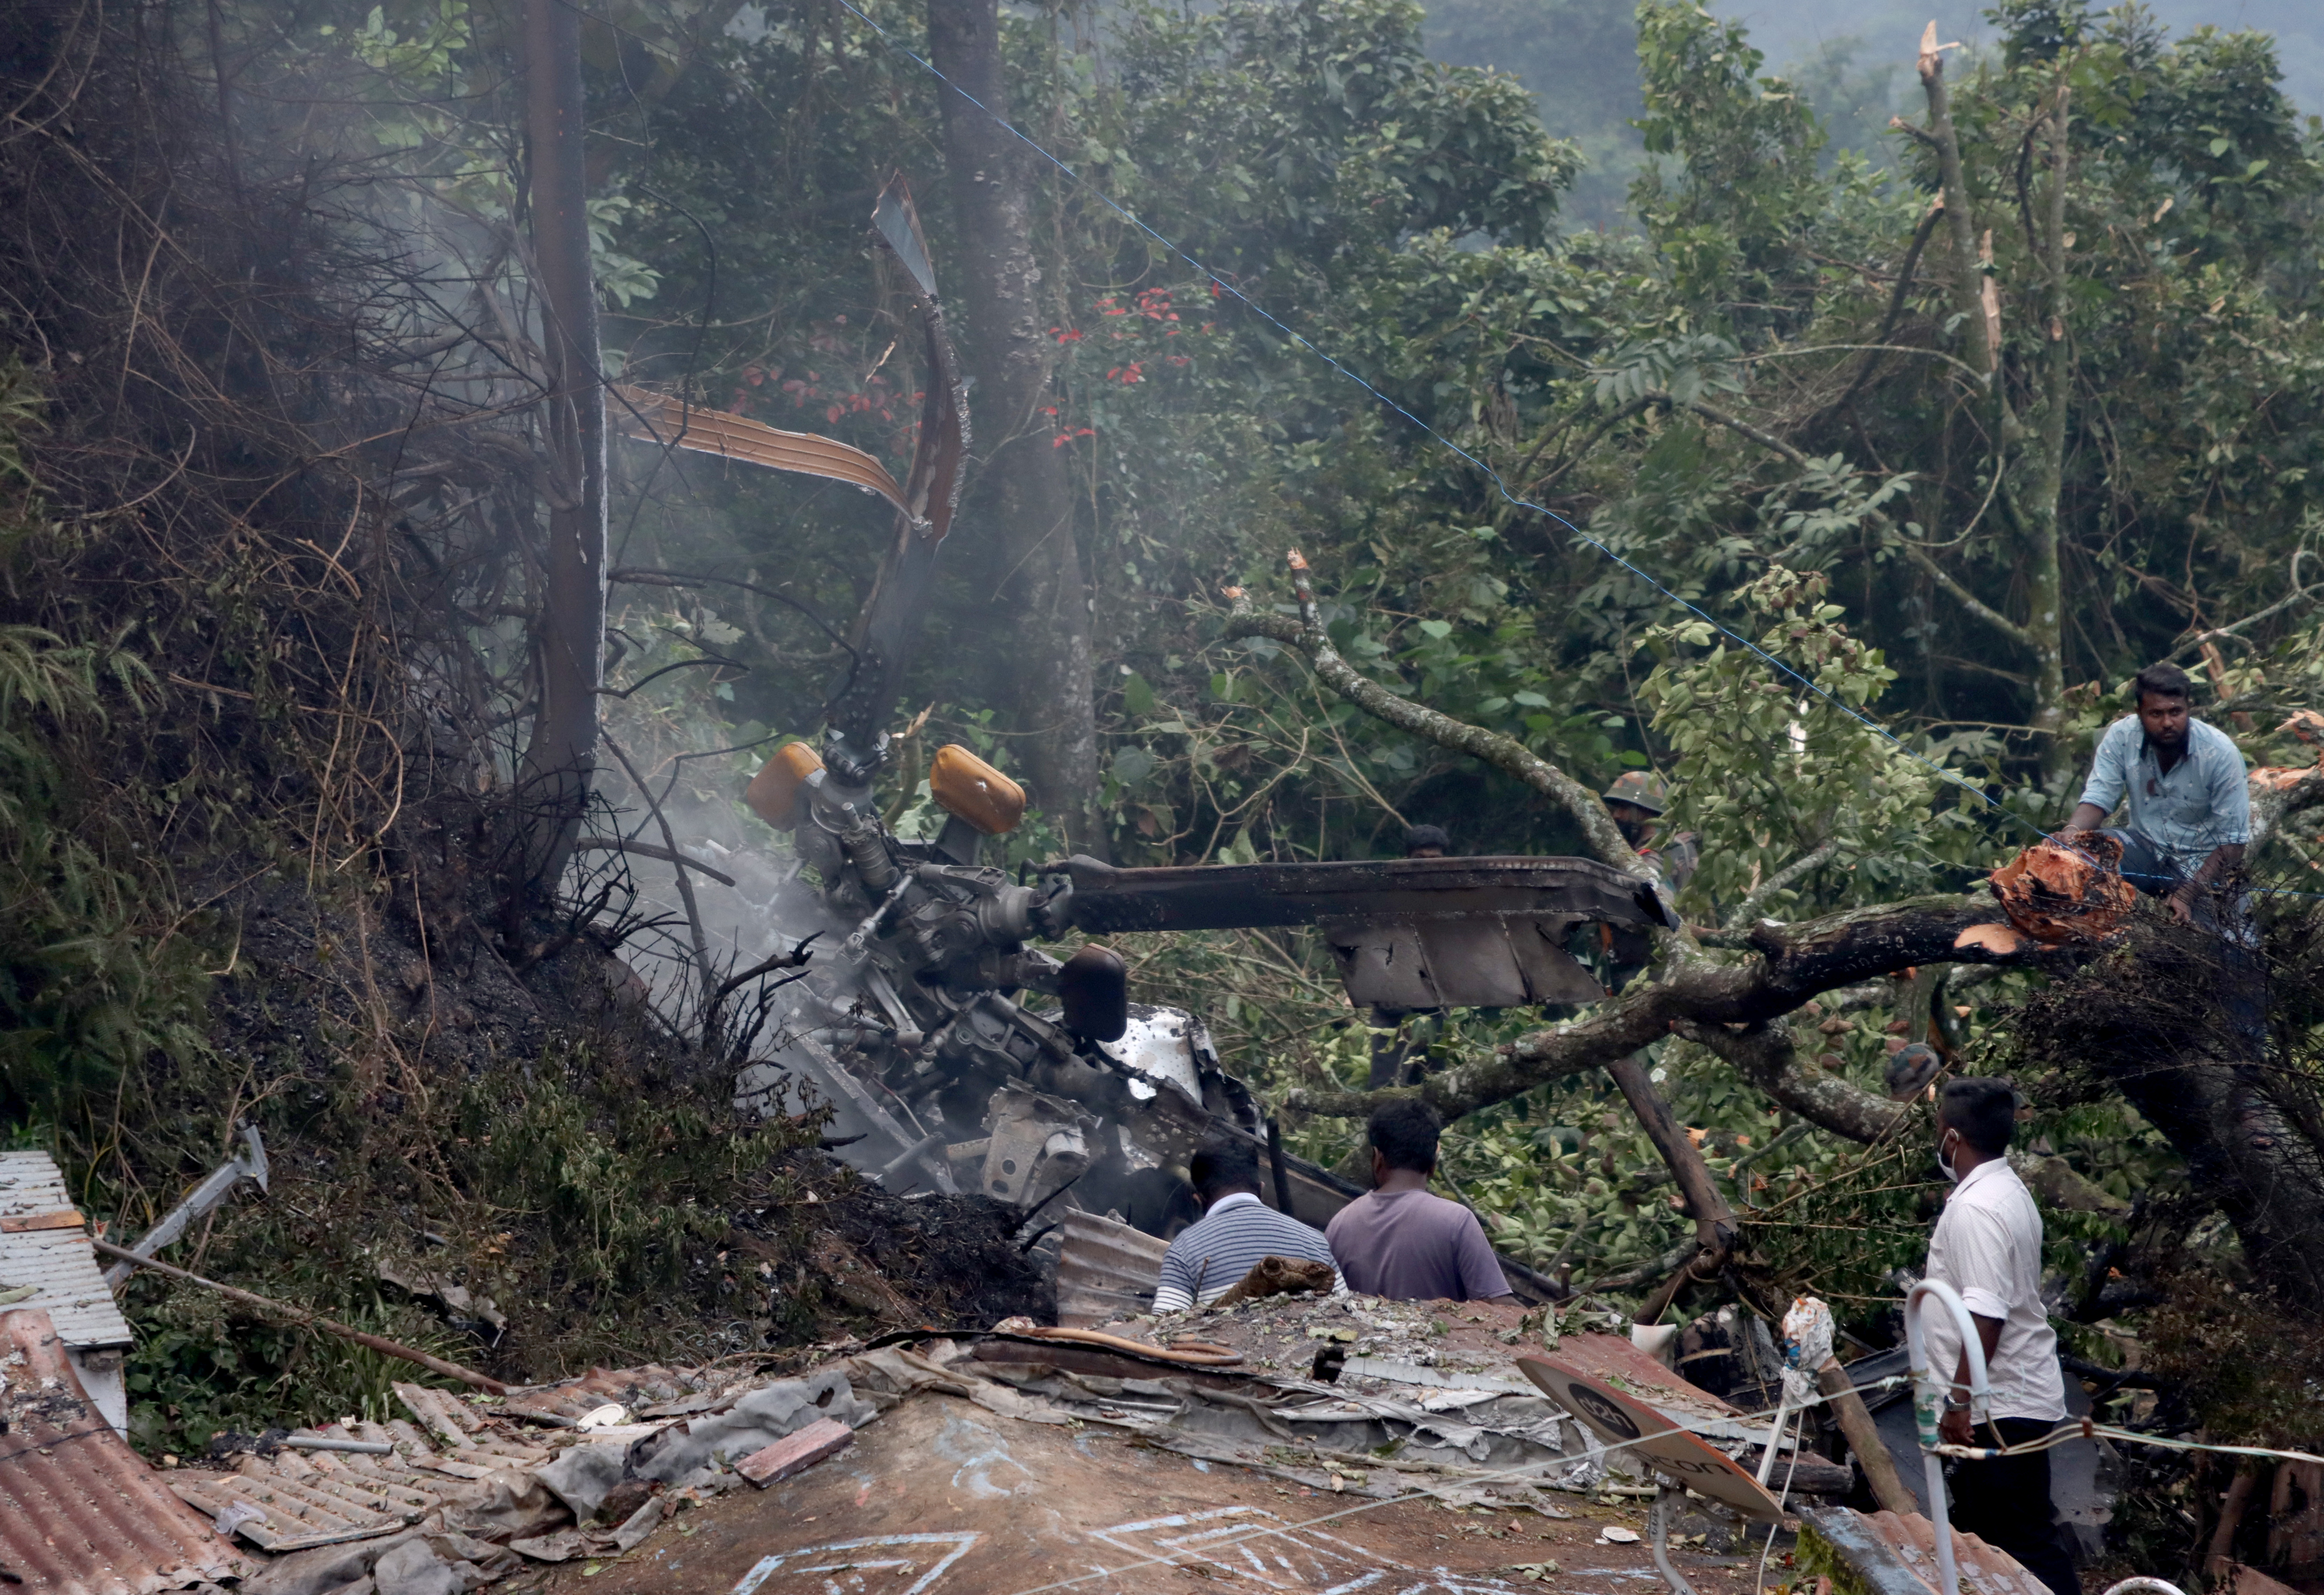 People stand near the debris of the Russian-made Mi-17V5 helicopter after it crashed near the town of Coonoor in the southern state of Tamil Nadu, India, December 8, 2021. REUTERS/Stringer